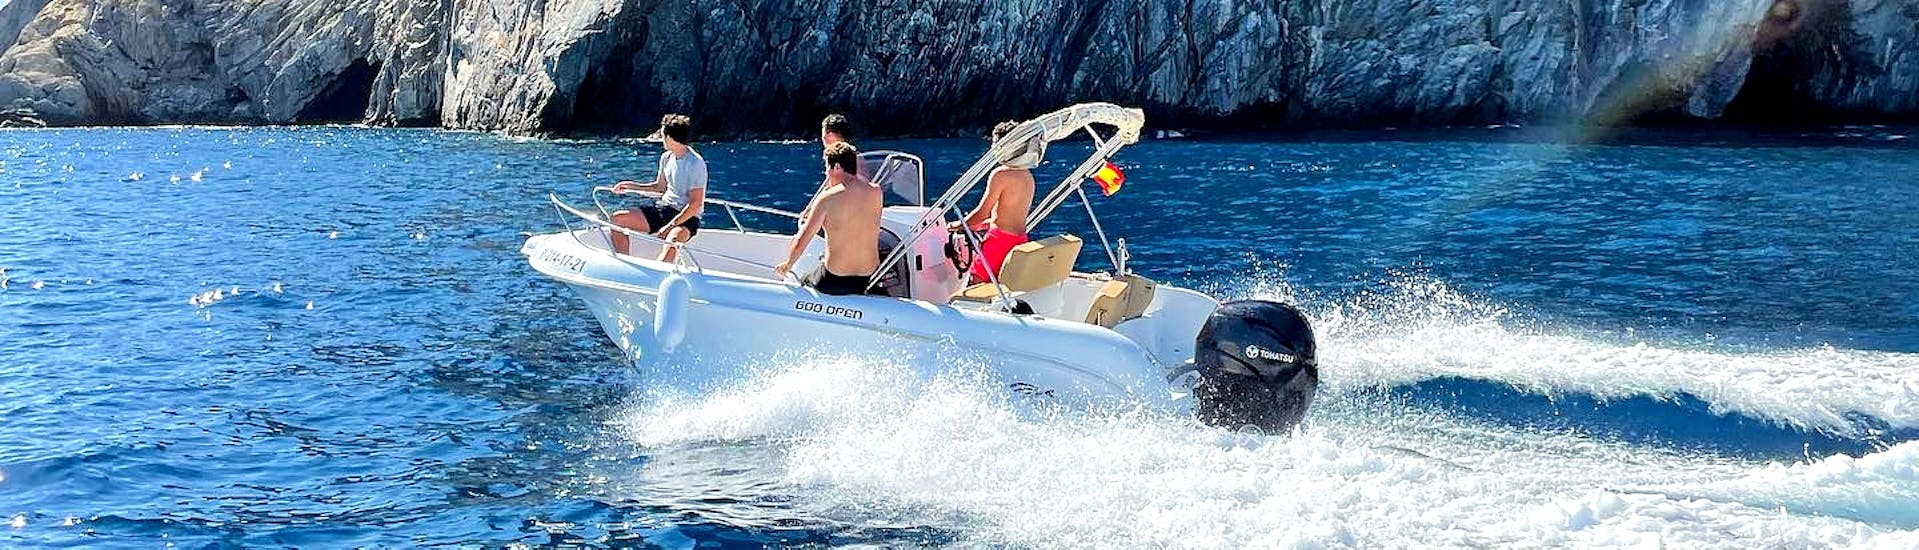 A couple having fun on the ASTEC FIBER 450 motorboat surrounded by turquoise waters of the Bay of Roses during a boat rental for up to 5 people with Maxi Boats license.